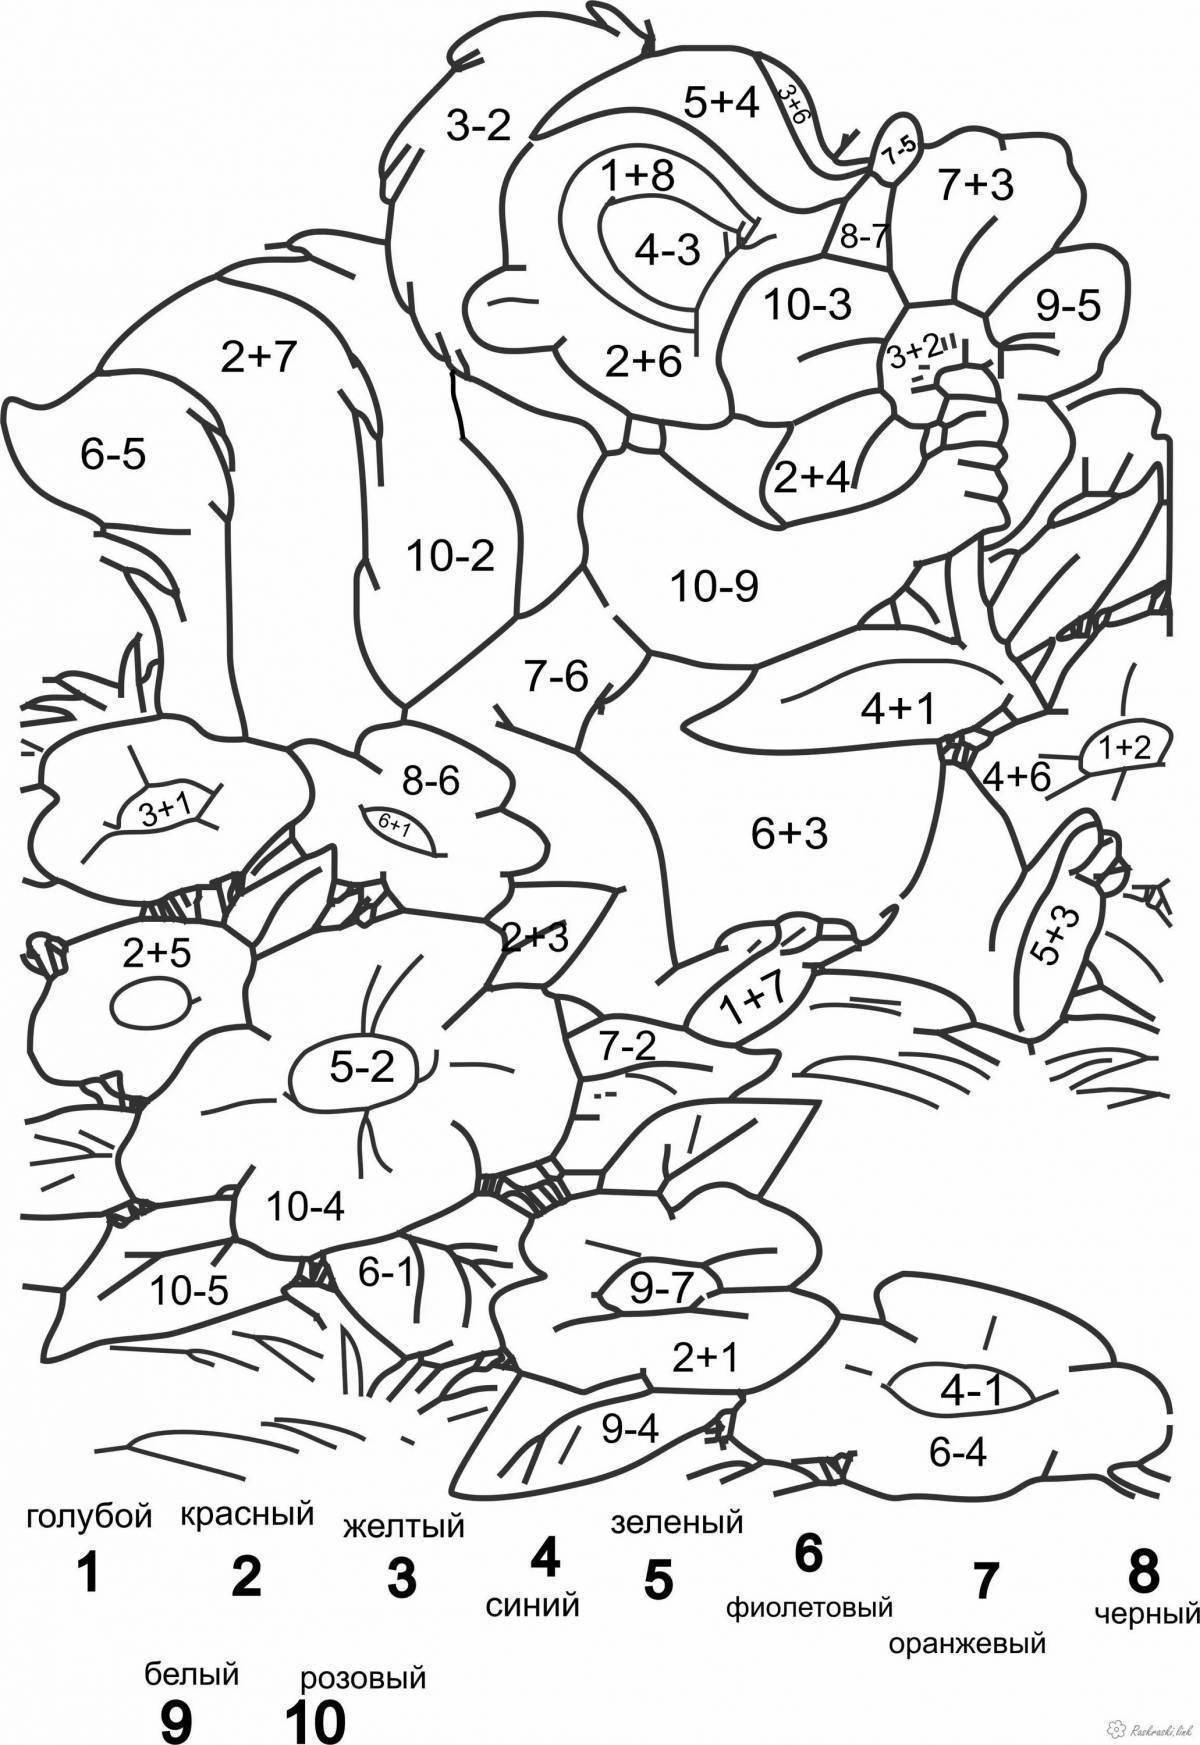 Creative count up to 10 coloring pages for kids